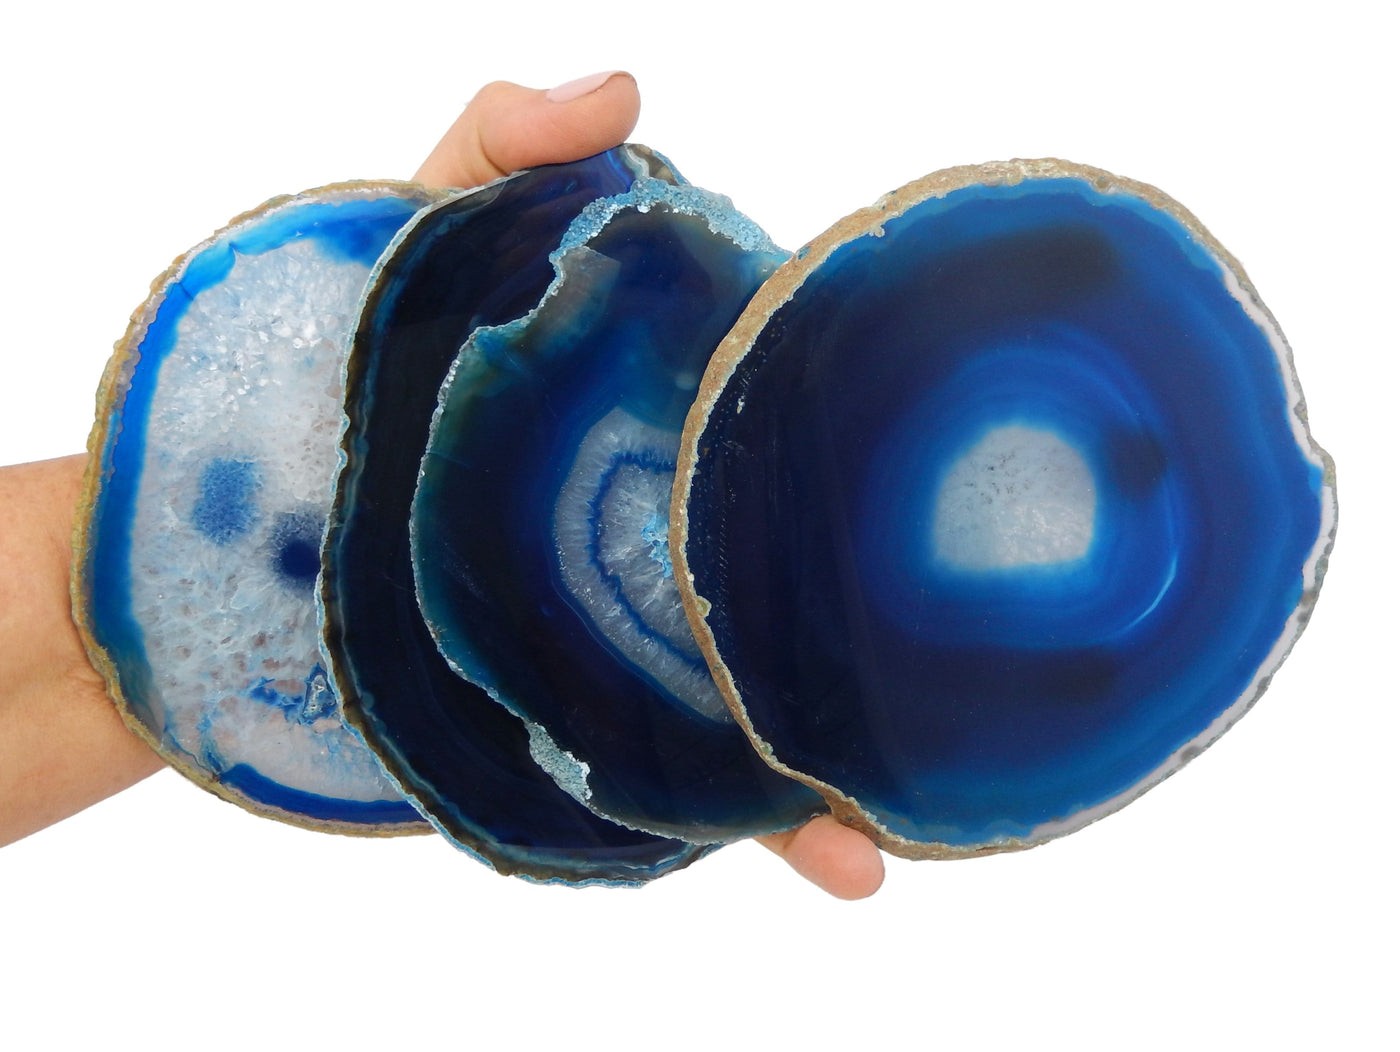 Blue agate slice size number 6 in hand for size and characteristic reference